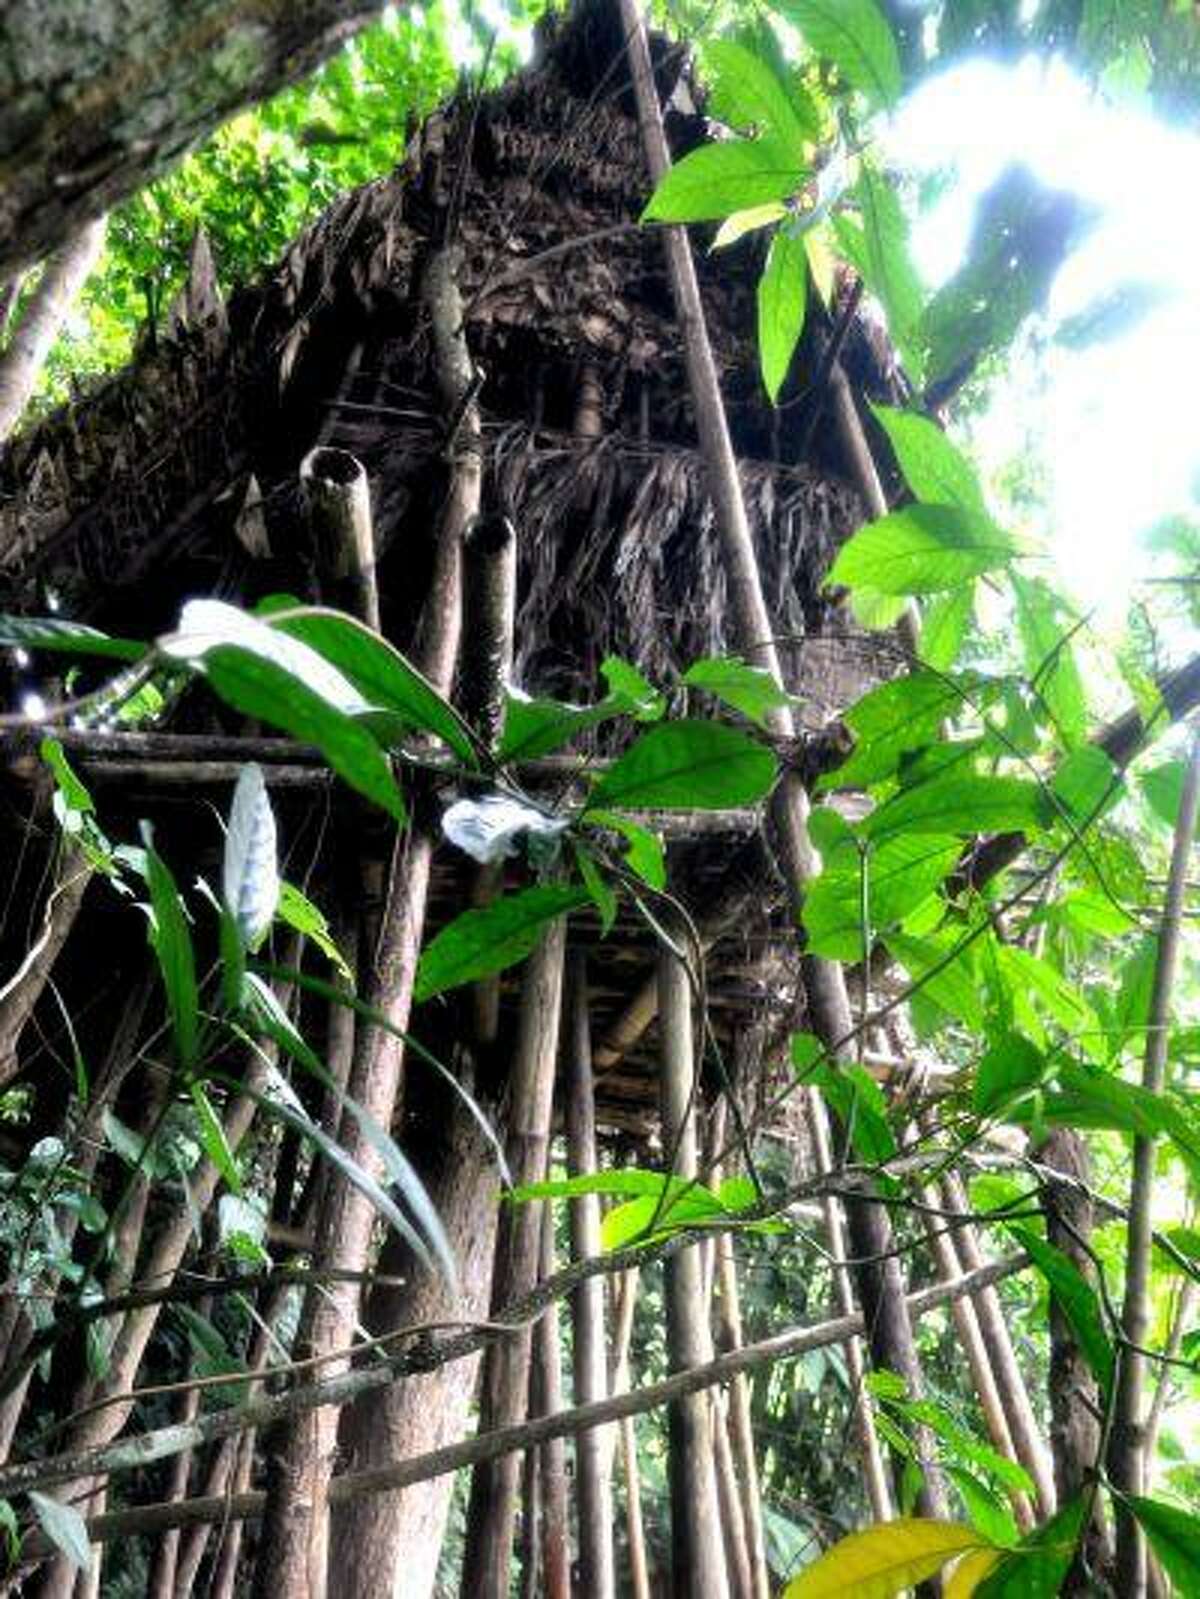 This picture taken on August 7, 2013 shows a hut built in a tree, five metres (16 feet) from the forest floor, where father Ho Van Thanh, 82, and his son Ho Van Lang, 42 lived deep in the jungle in the Tay Tra district of the central Vietnamese province of Quang Ngai.